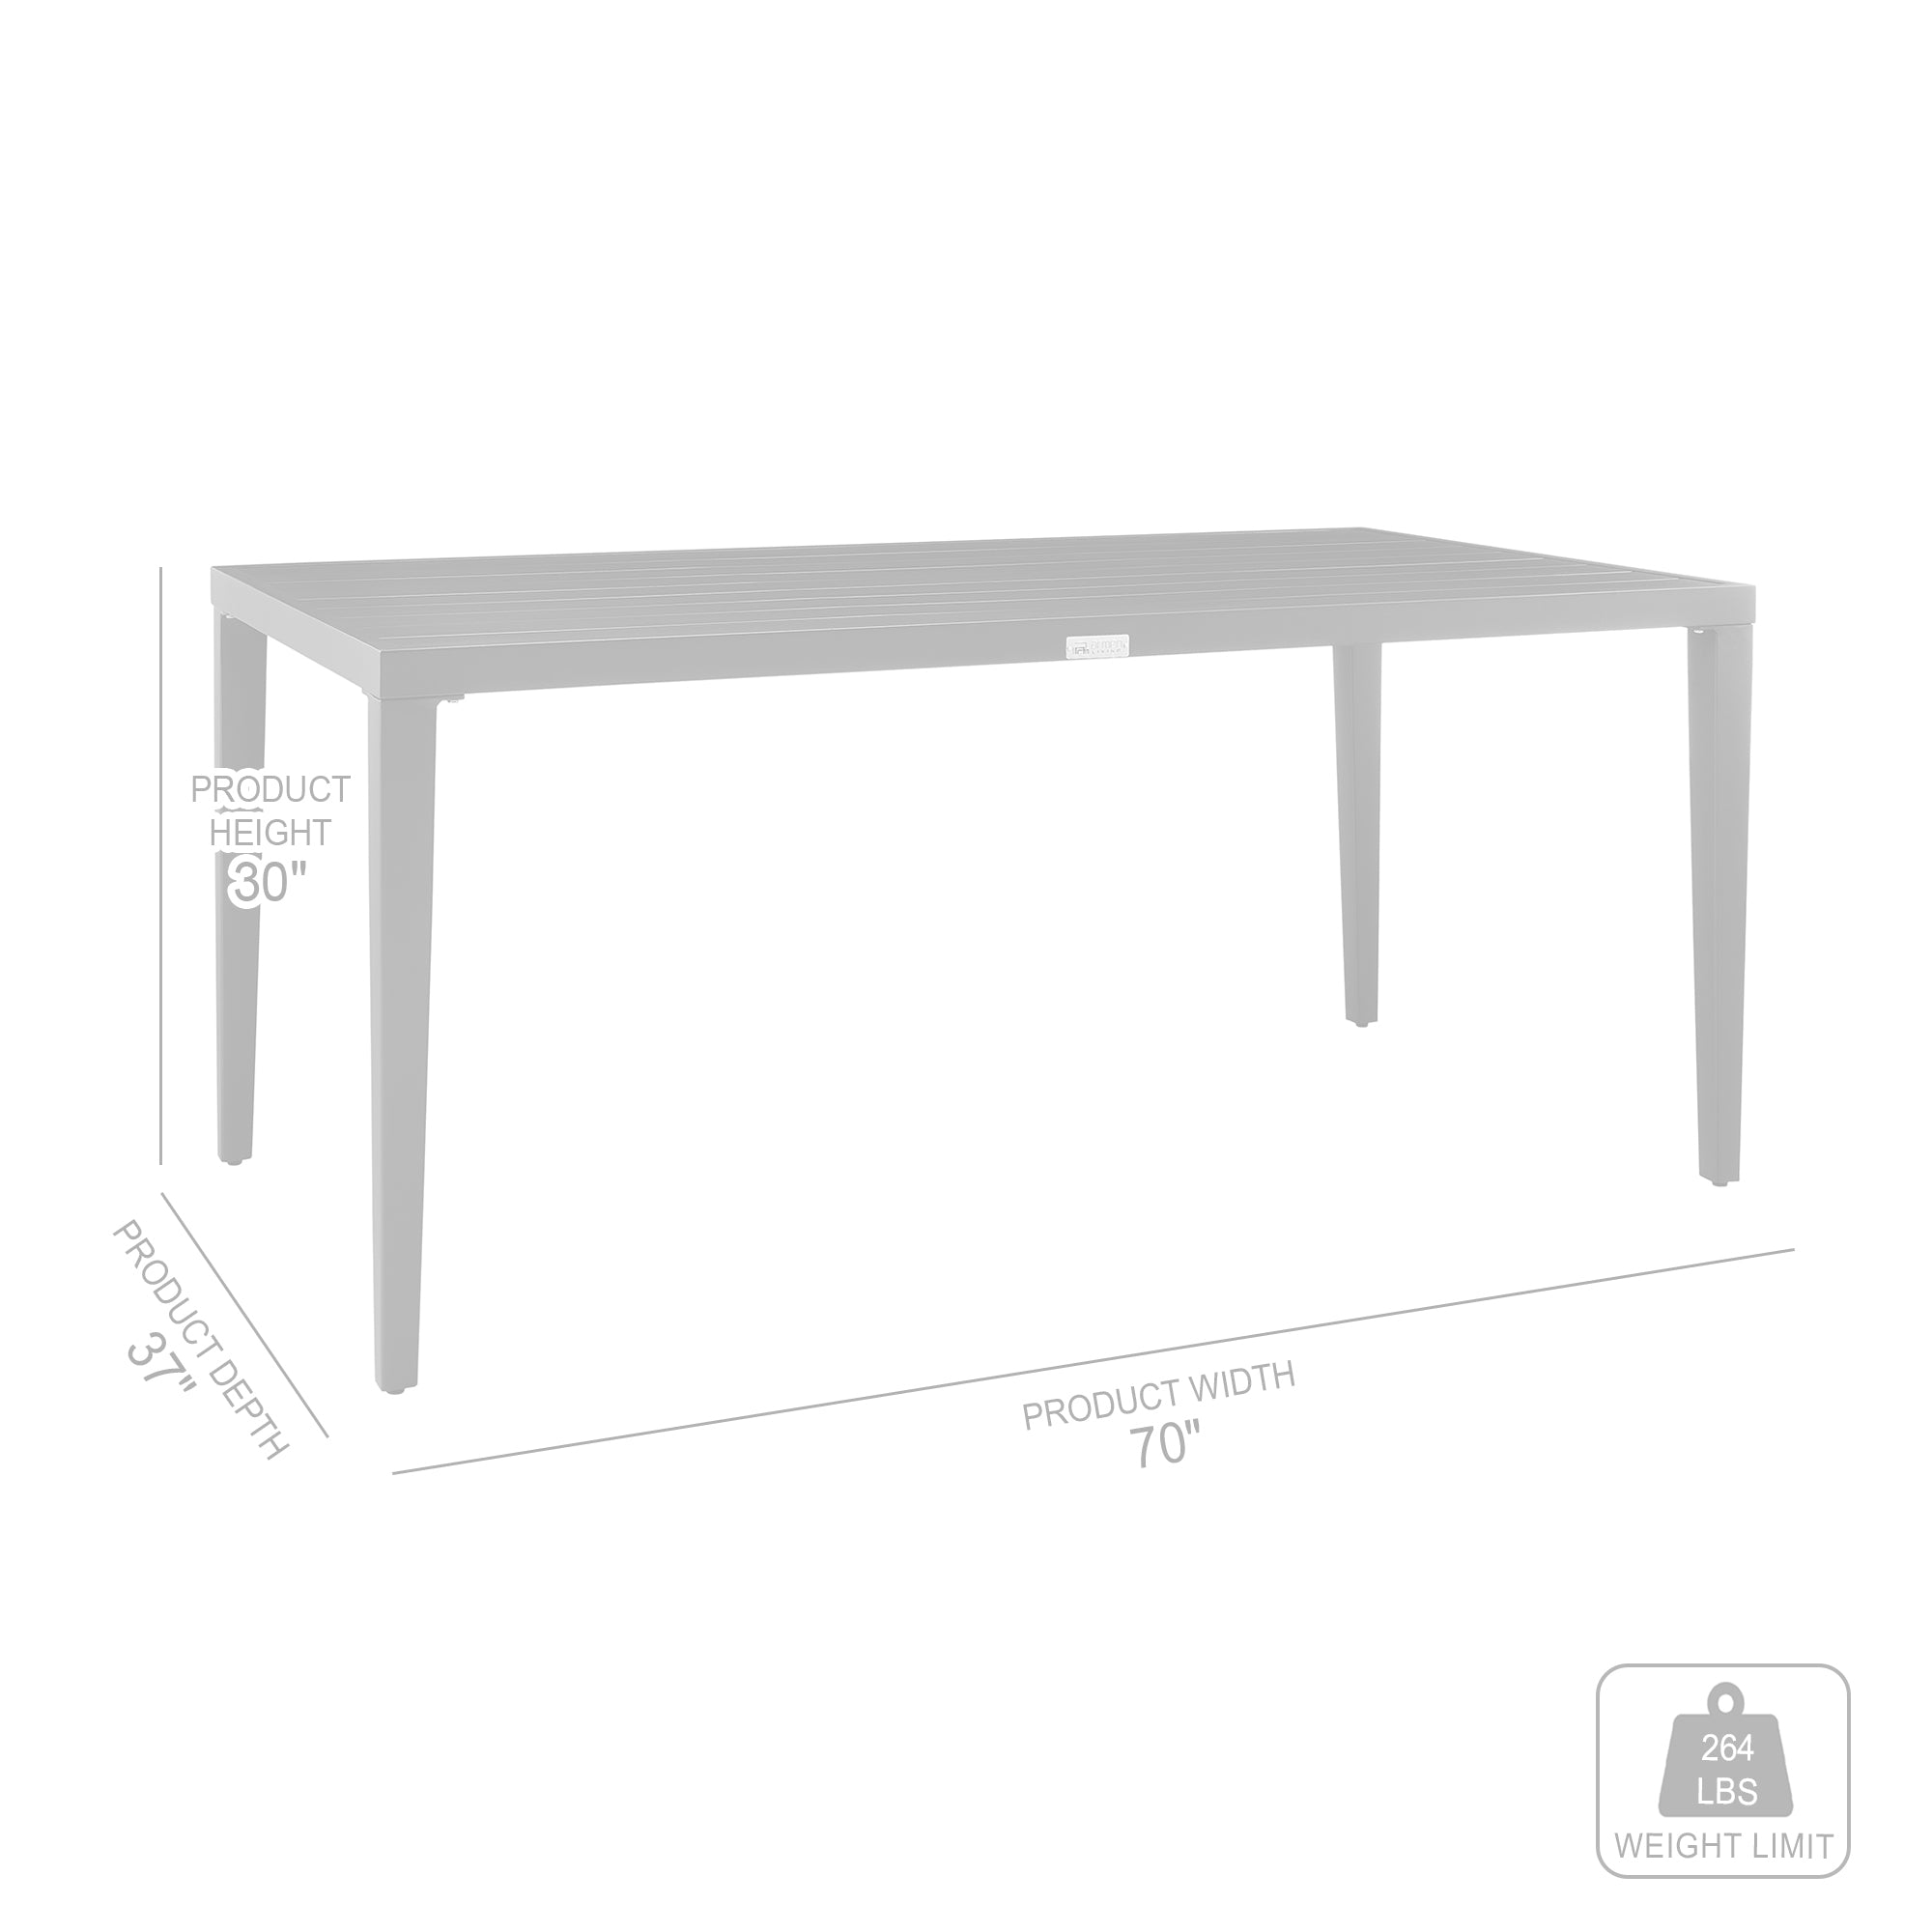 Armen Living - Aileen Outdoor Patio Dining Table in Aluminum - 840254333215